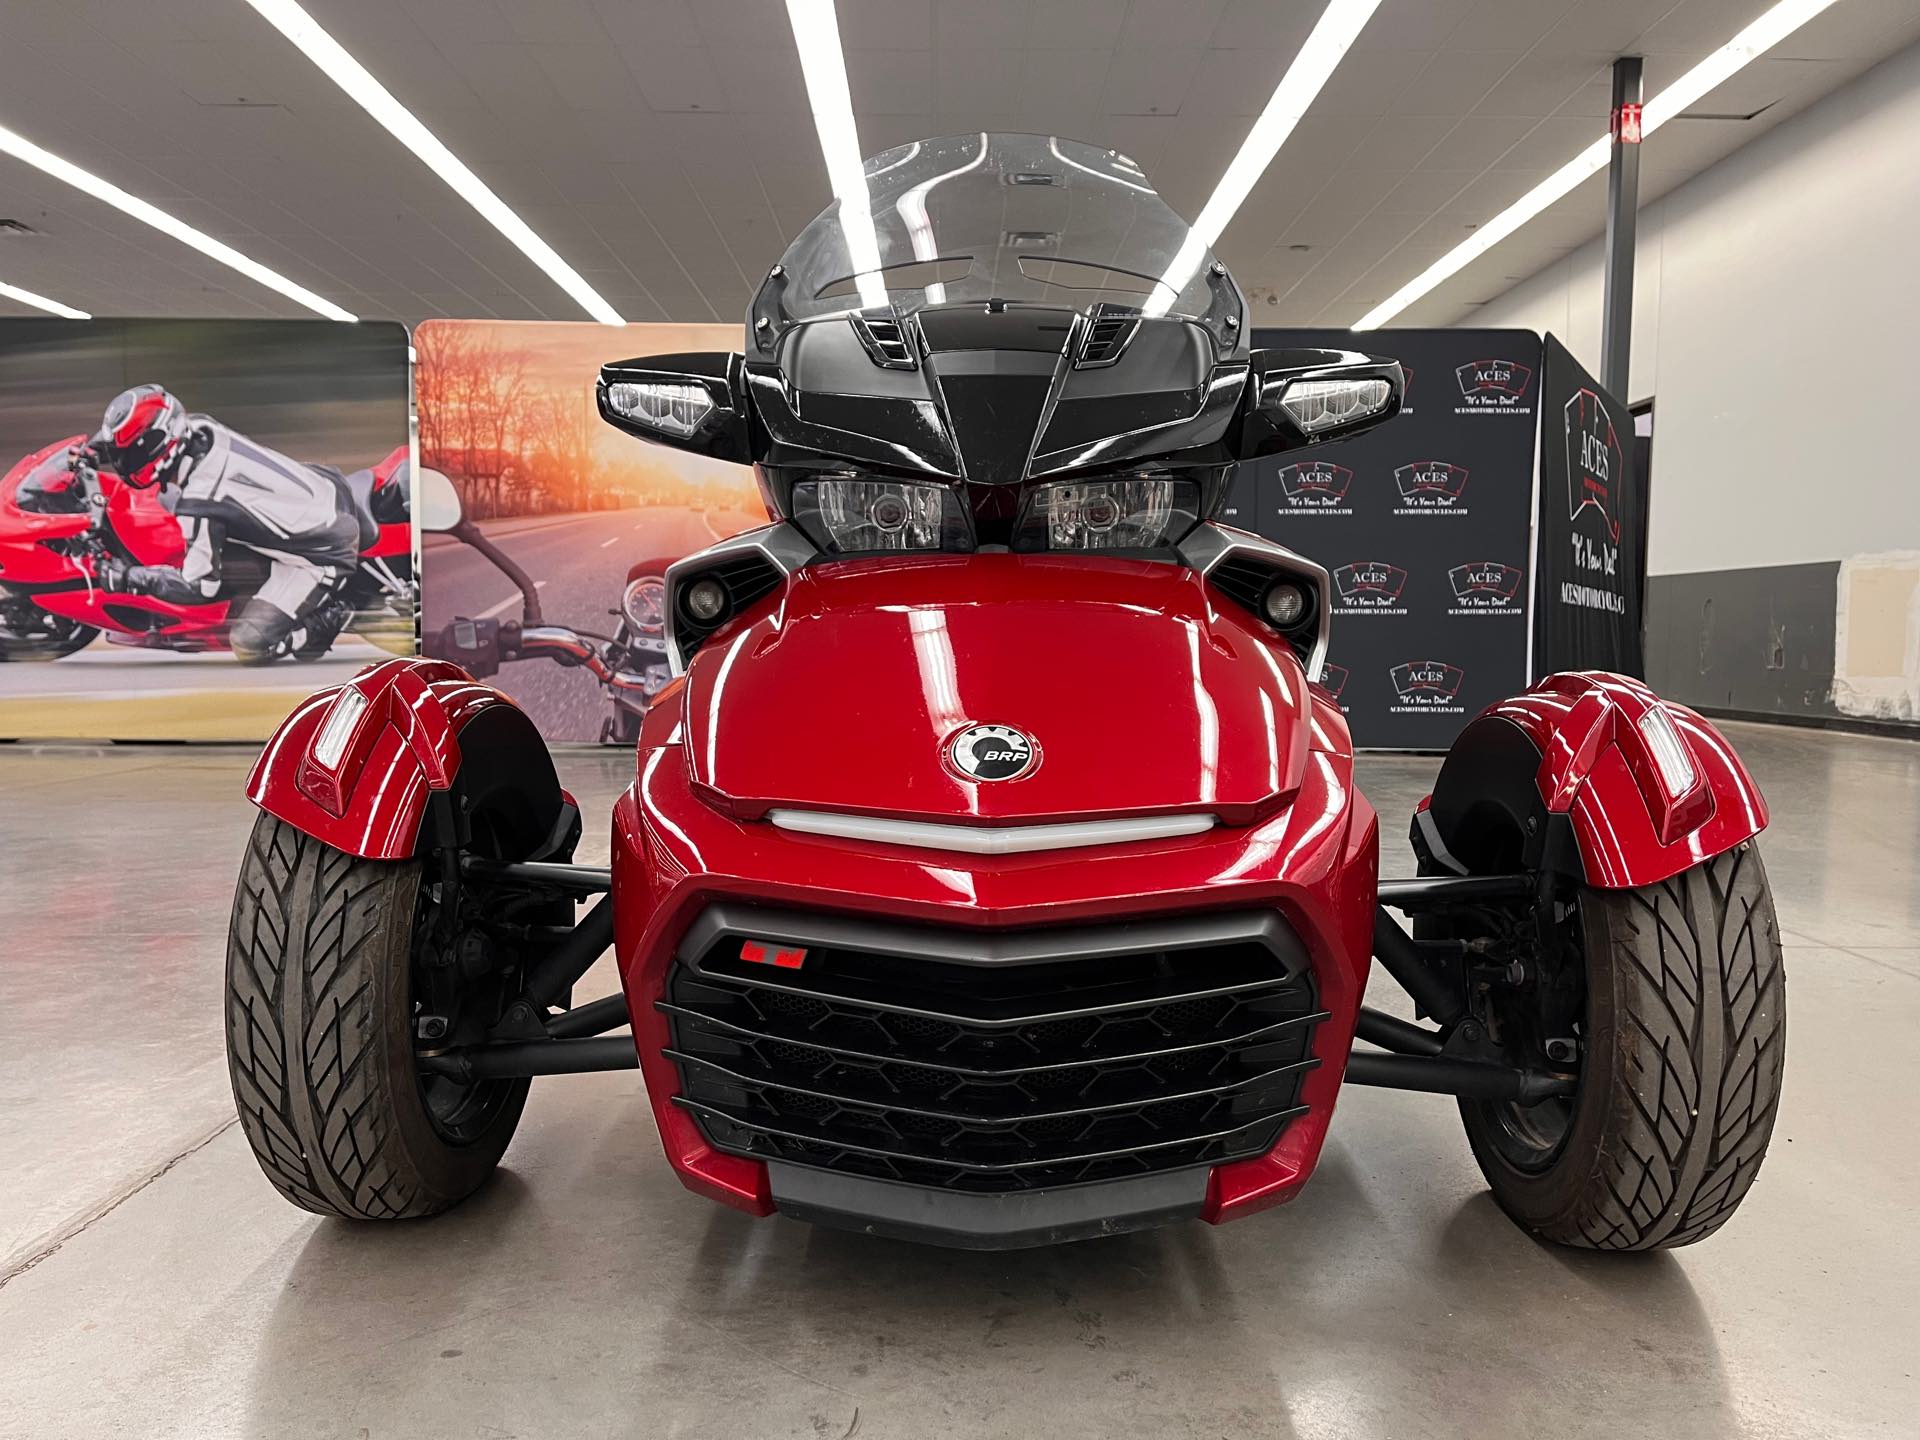 2016 Can-Am Spyder F3 Limited at Aces Motorcycles - Denver